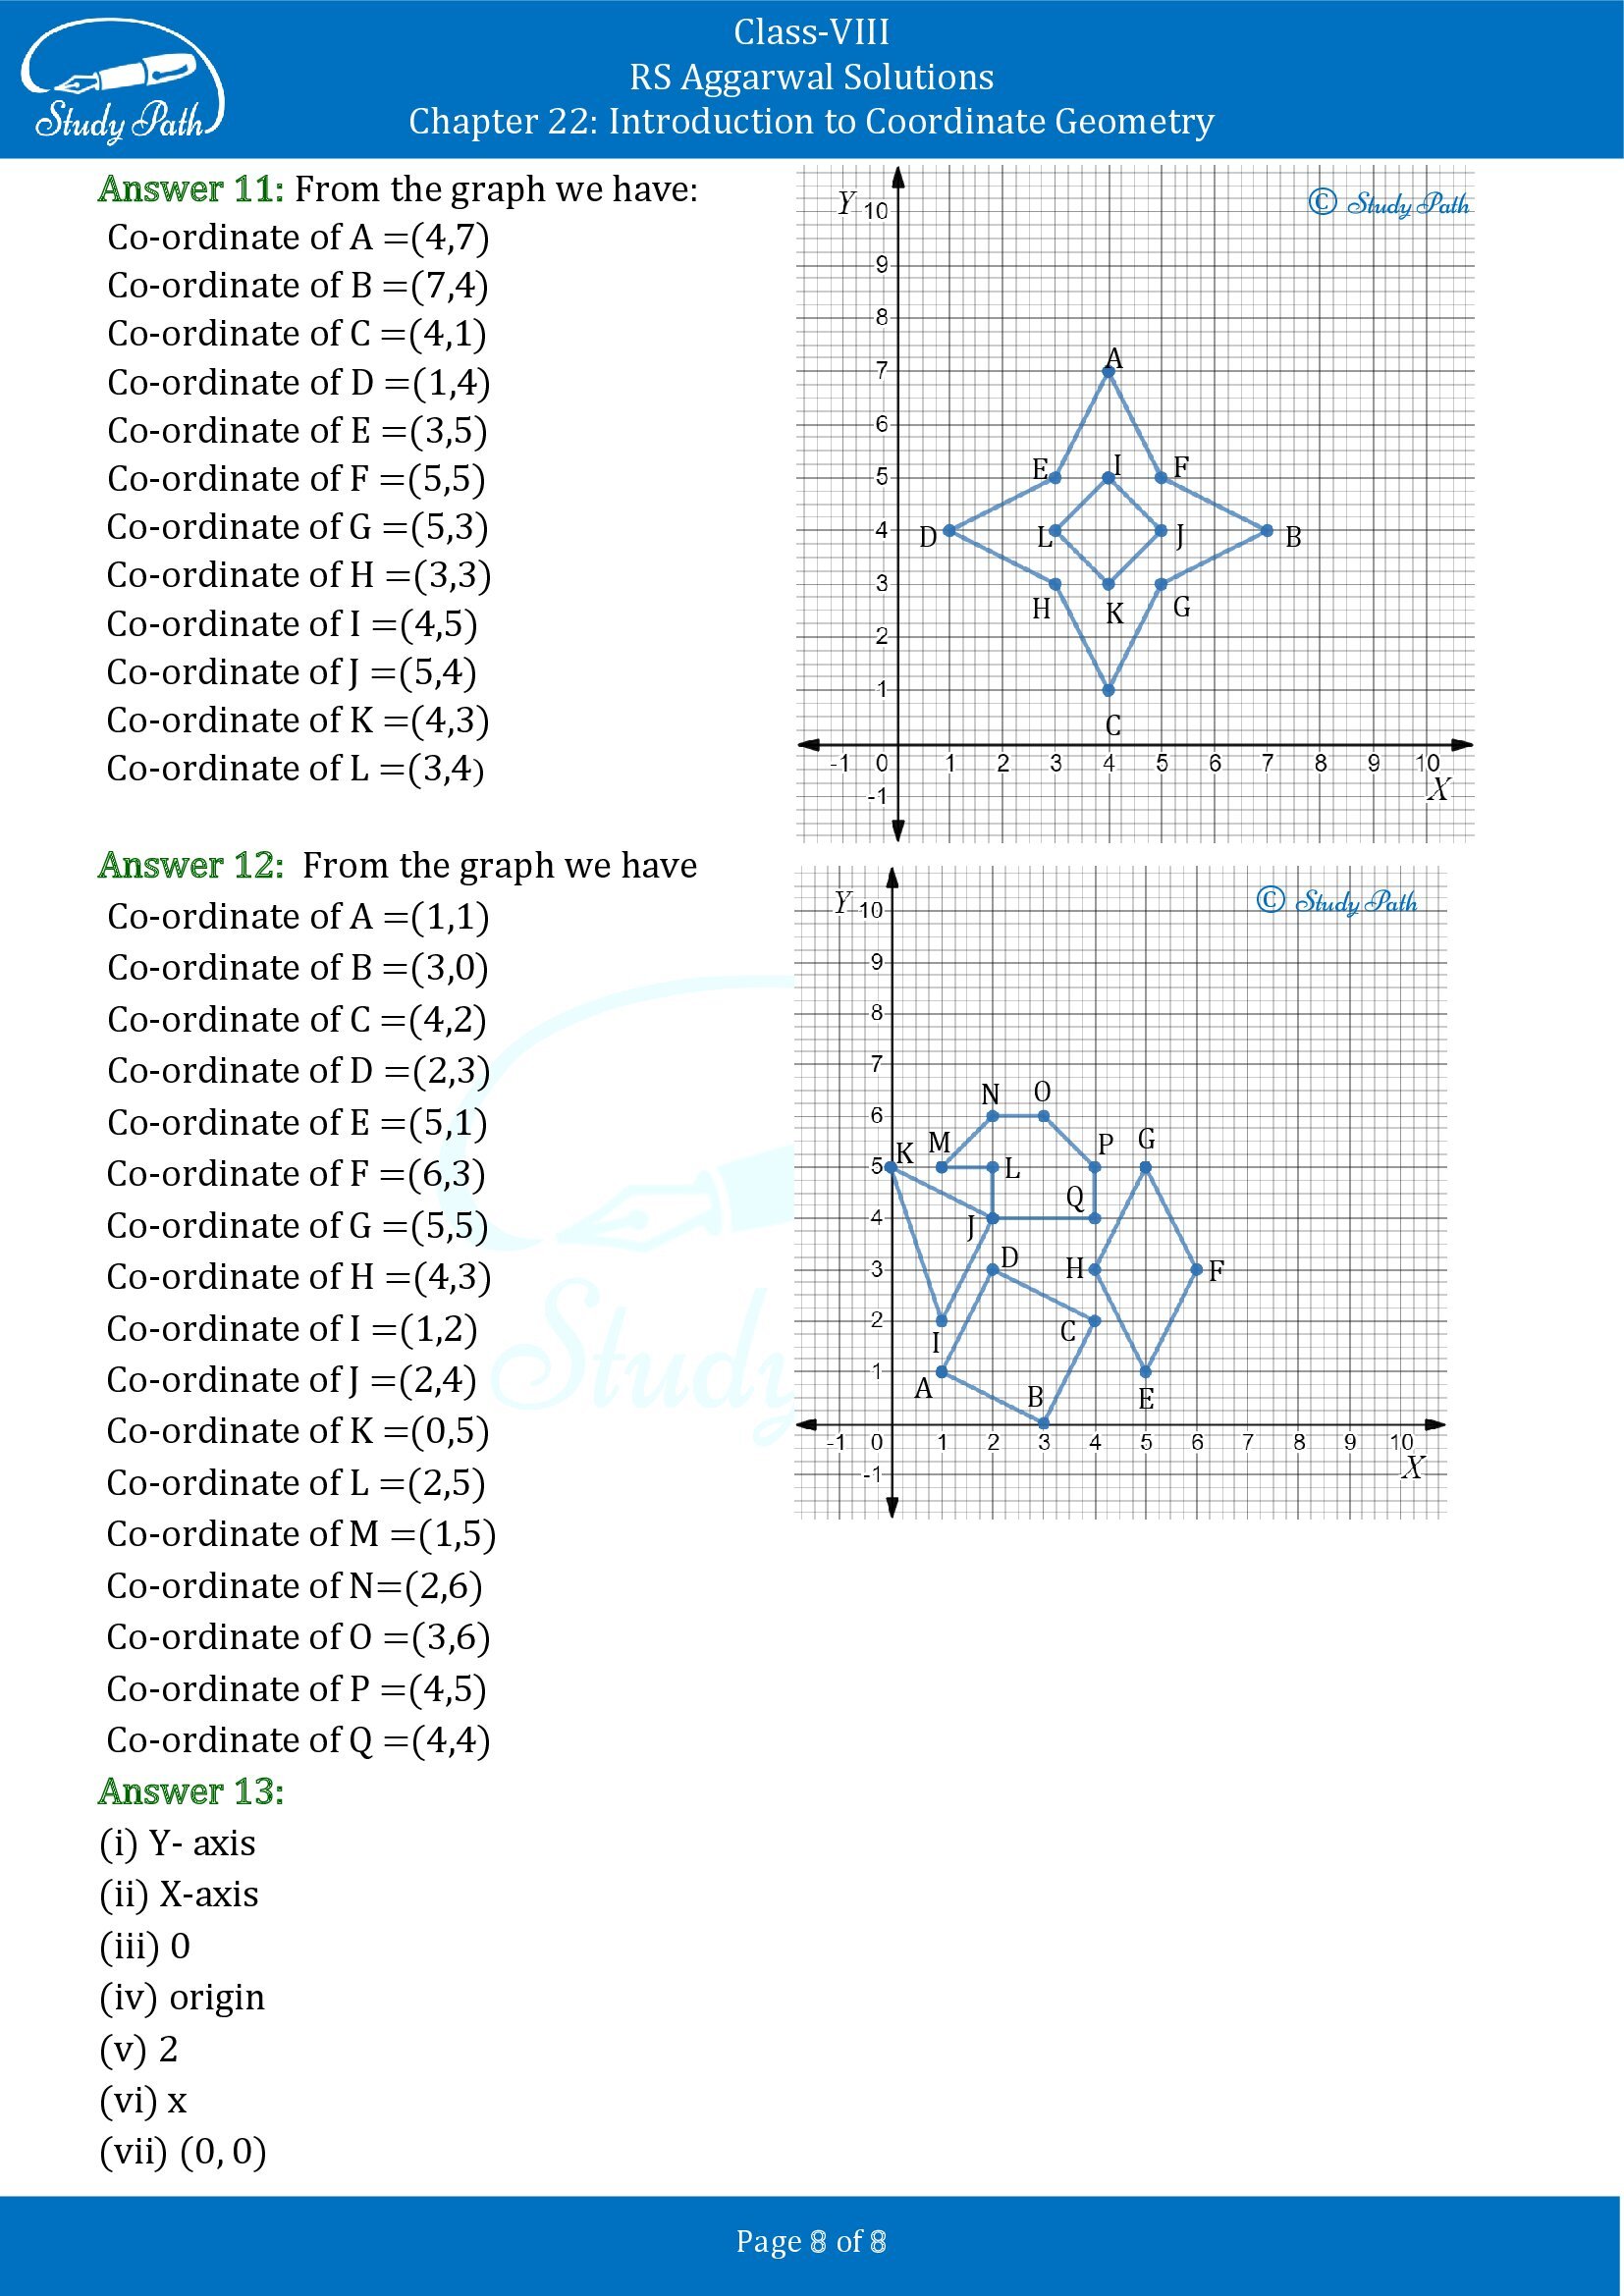 RS Aggarwal Solutions Class 8 Chapter 22 Introduction to Coordinate Geometry Exercise 22A 00008